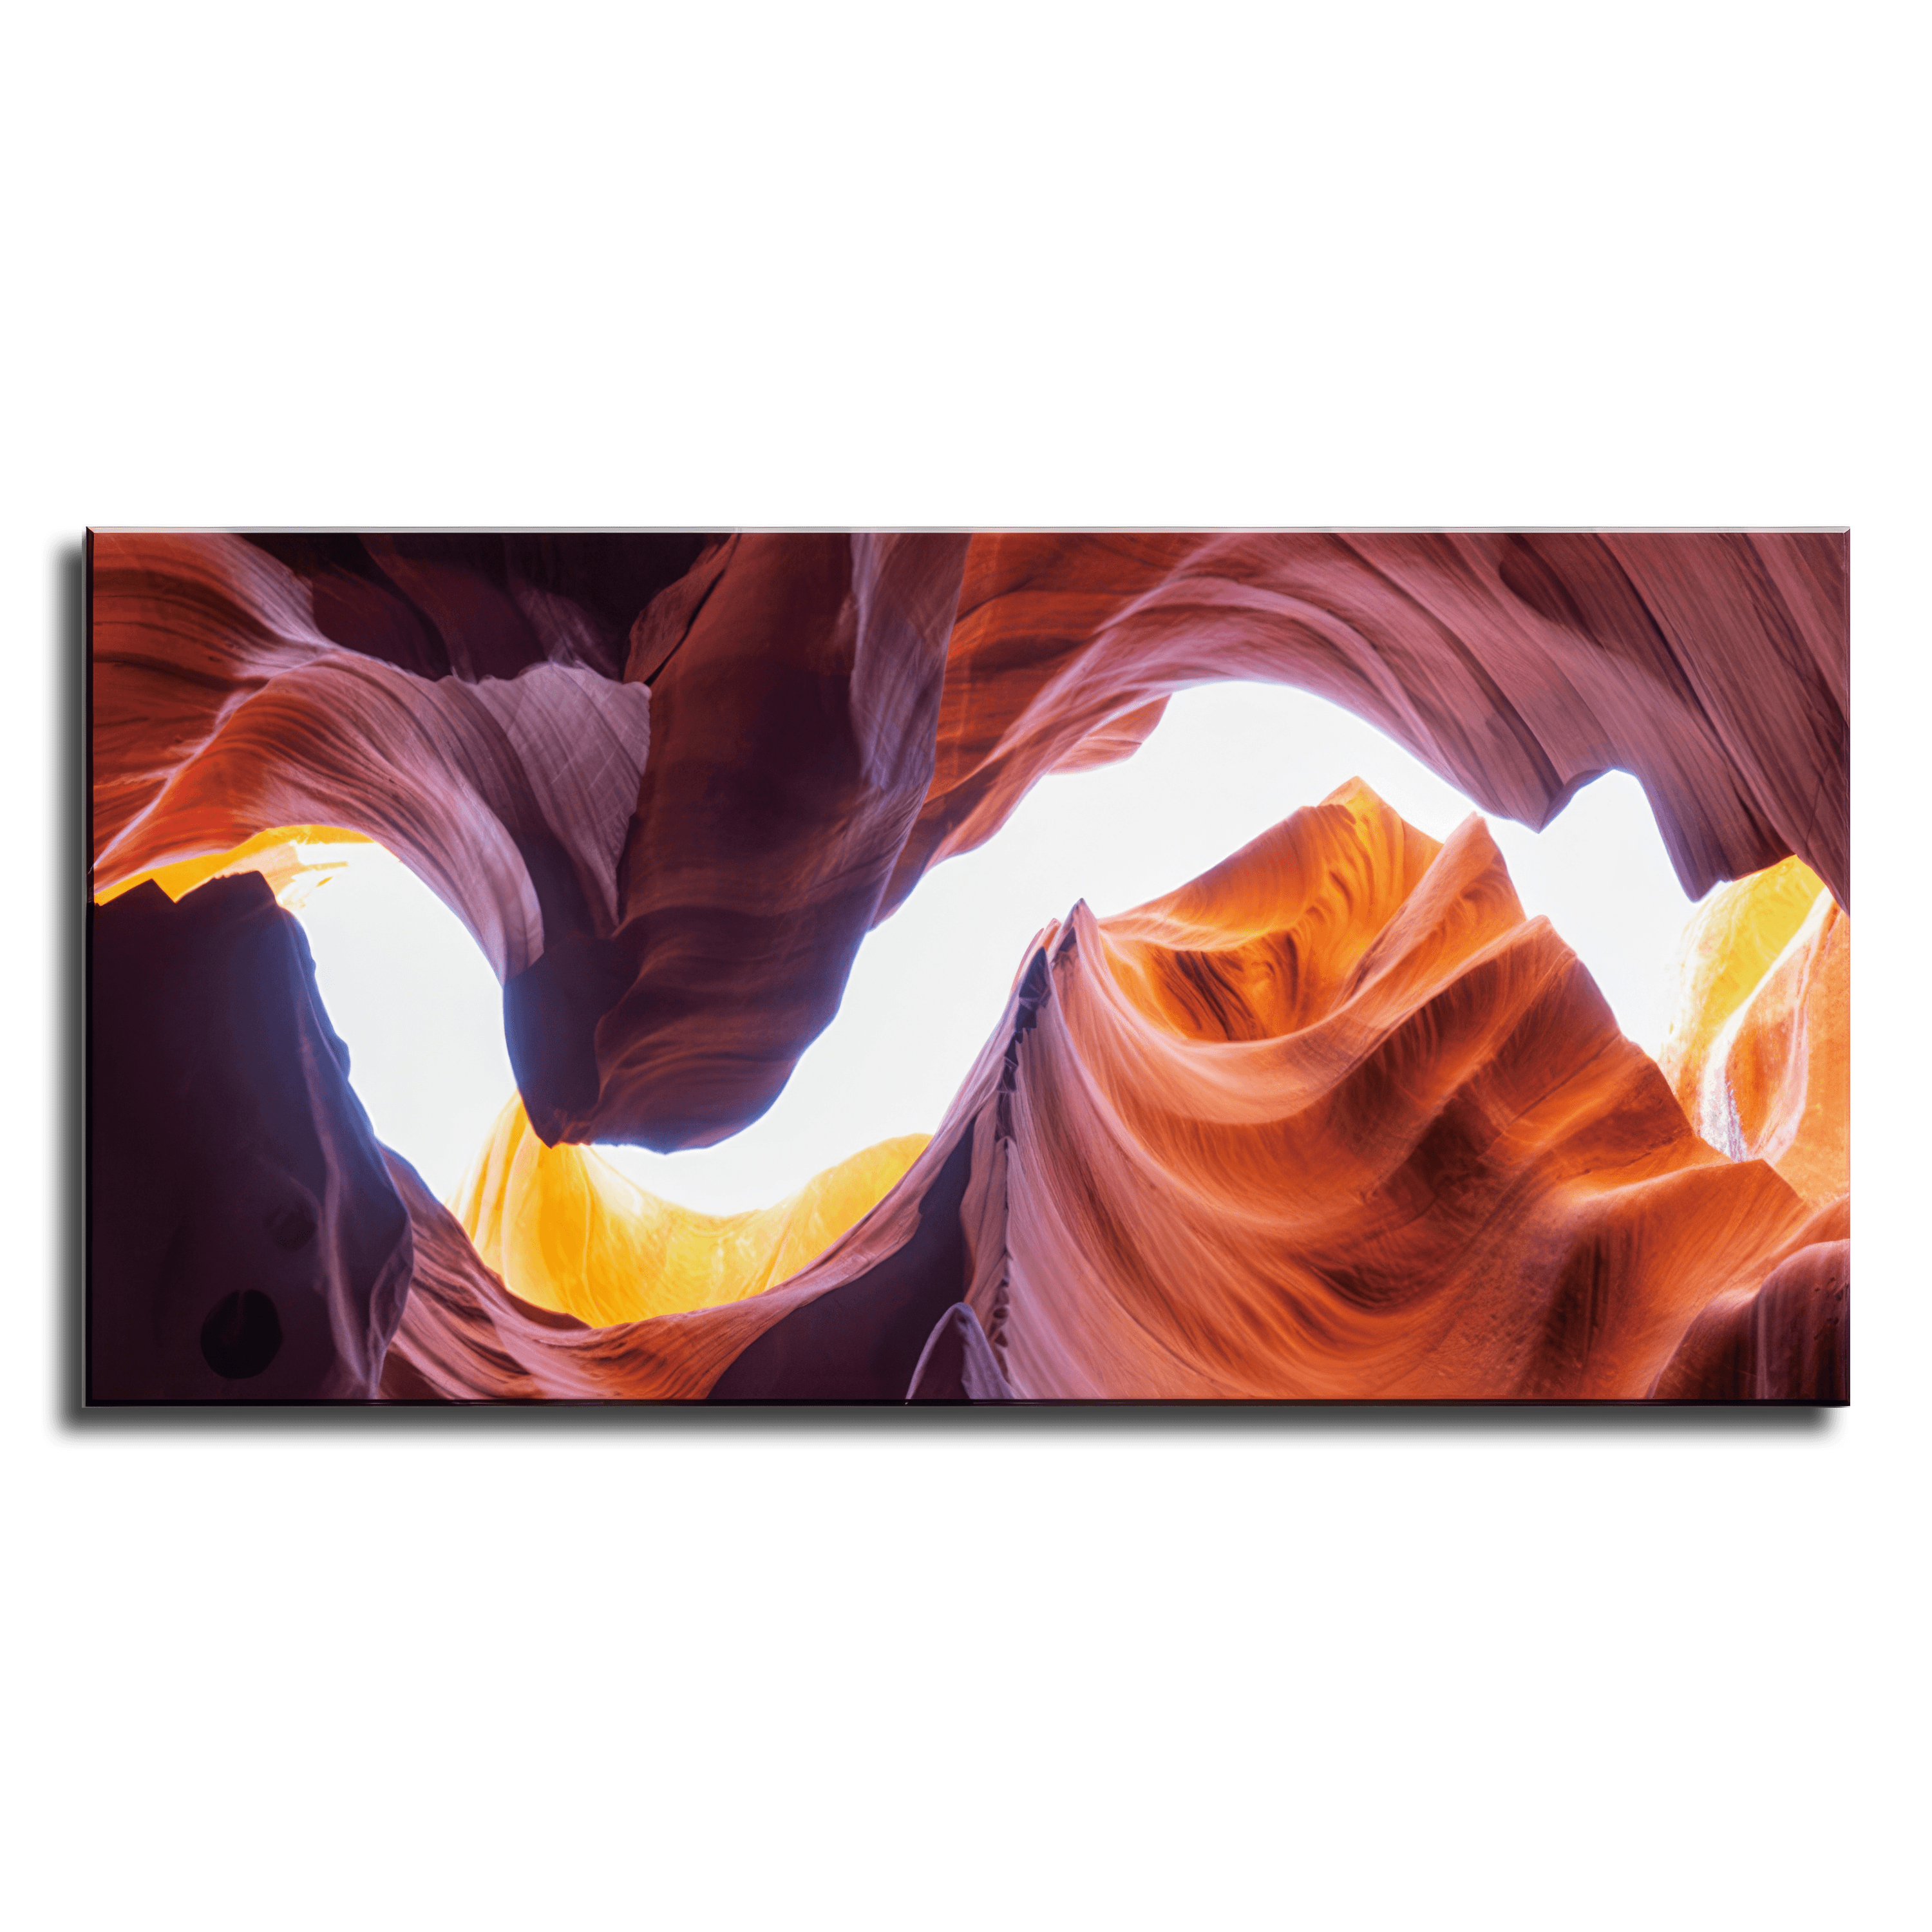 Antelope Canyon Triptych.